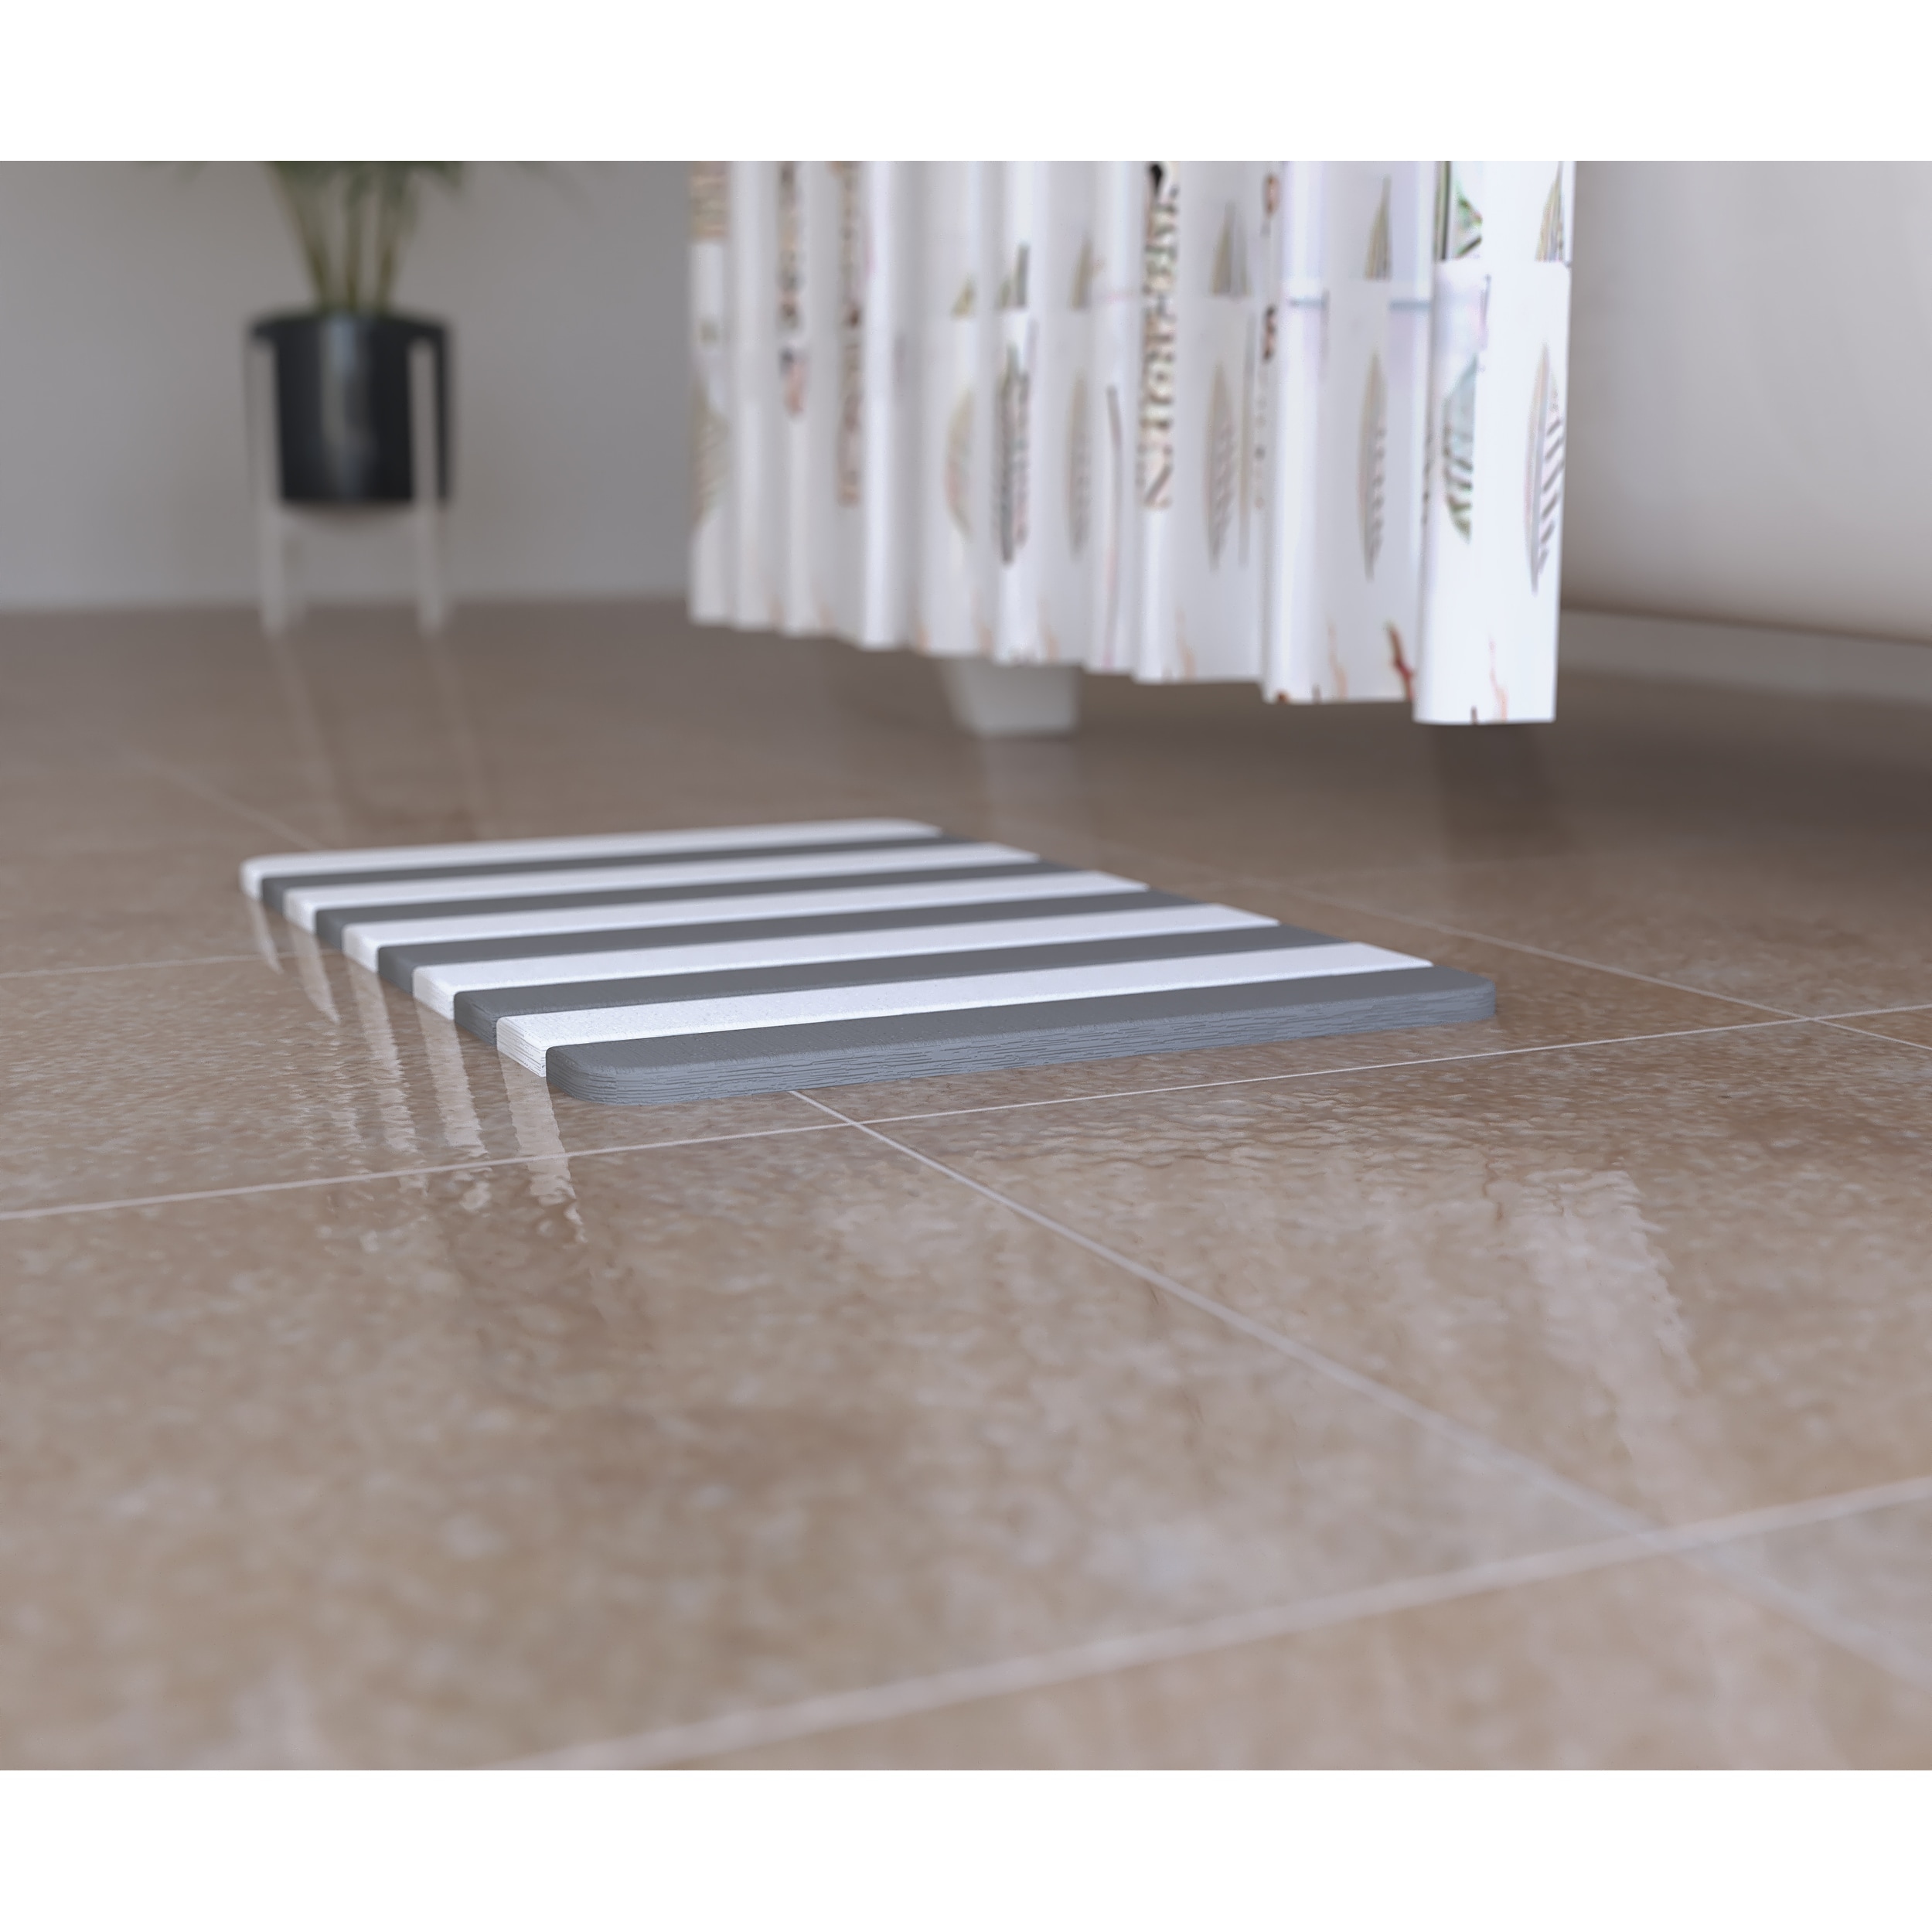 https://ak1.ostkcdn.com/images/products/is/images/direct/cae762e5b9e7f6e2adbb7587e265ac9b729f348e/Quick-Drying-Diatomite-Stone-Bath-Mat.jpg